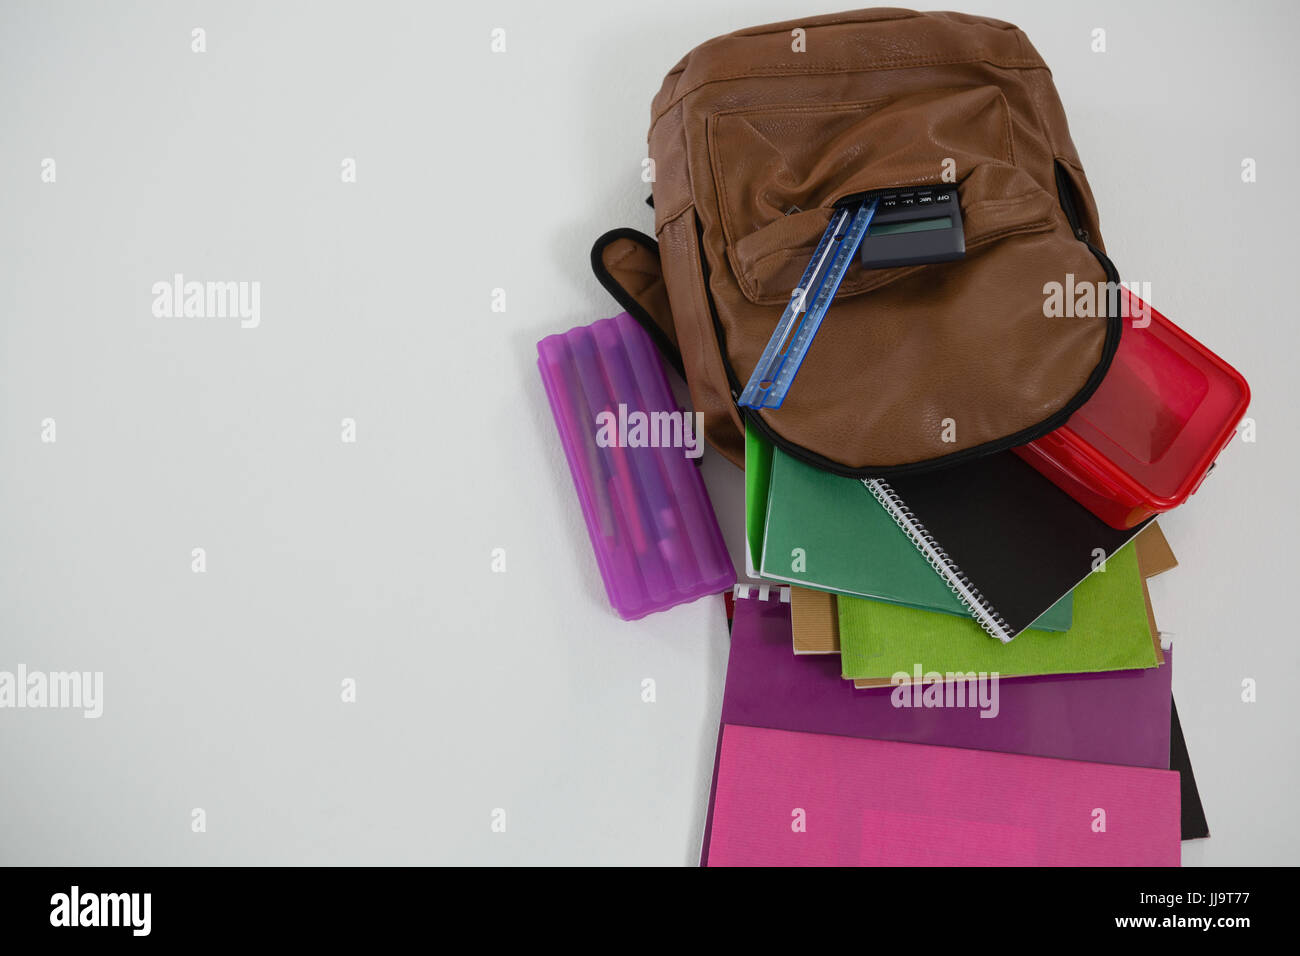 Overhead view of schoolbag with various supplies on white background Stock Photo